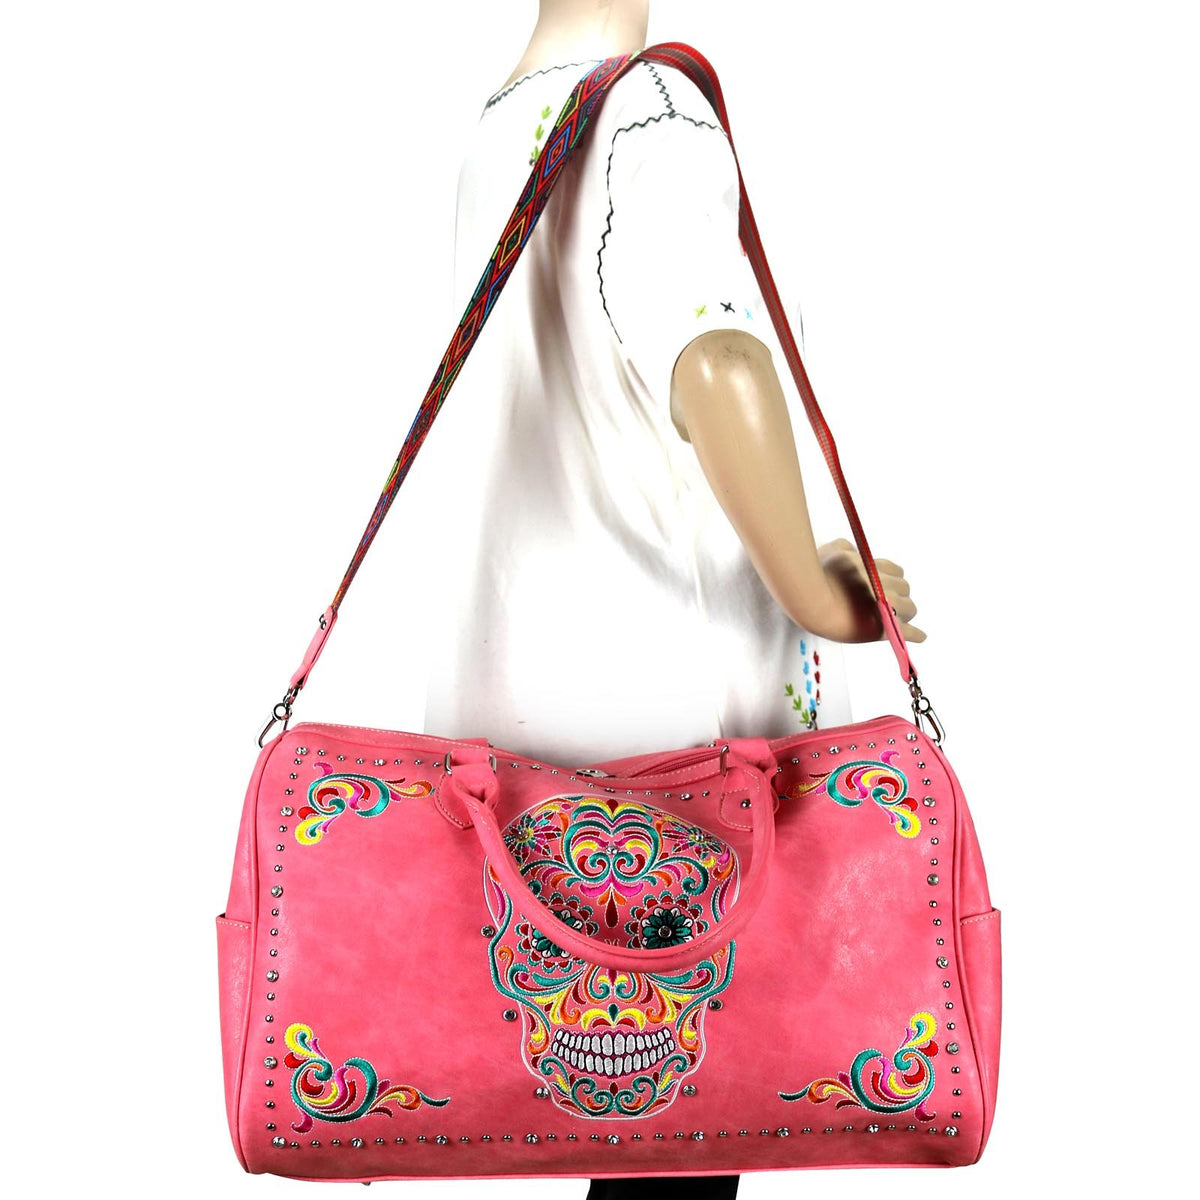 Want a Unique Duffle Bag? Take a look at our Embroidered Sugar Skull Duffle featuring a Vibrant Sugar Skull design accented with silver and crystal studs, top zipper closure, open button closure side pockets, interior zippered pocket and multiple open pockets, metal feet for protection and stability, detachable/adjustable shoulder strap, double handle, 20" x 8" x 12.5" dimensions. Gothic, Halloween, Punk, Alternative, Emo, Skull, Artistic, Unique, Statement Piece. 